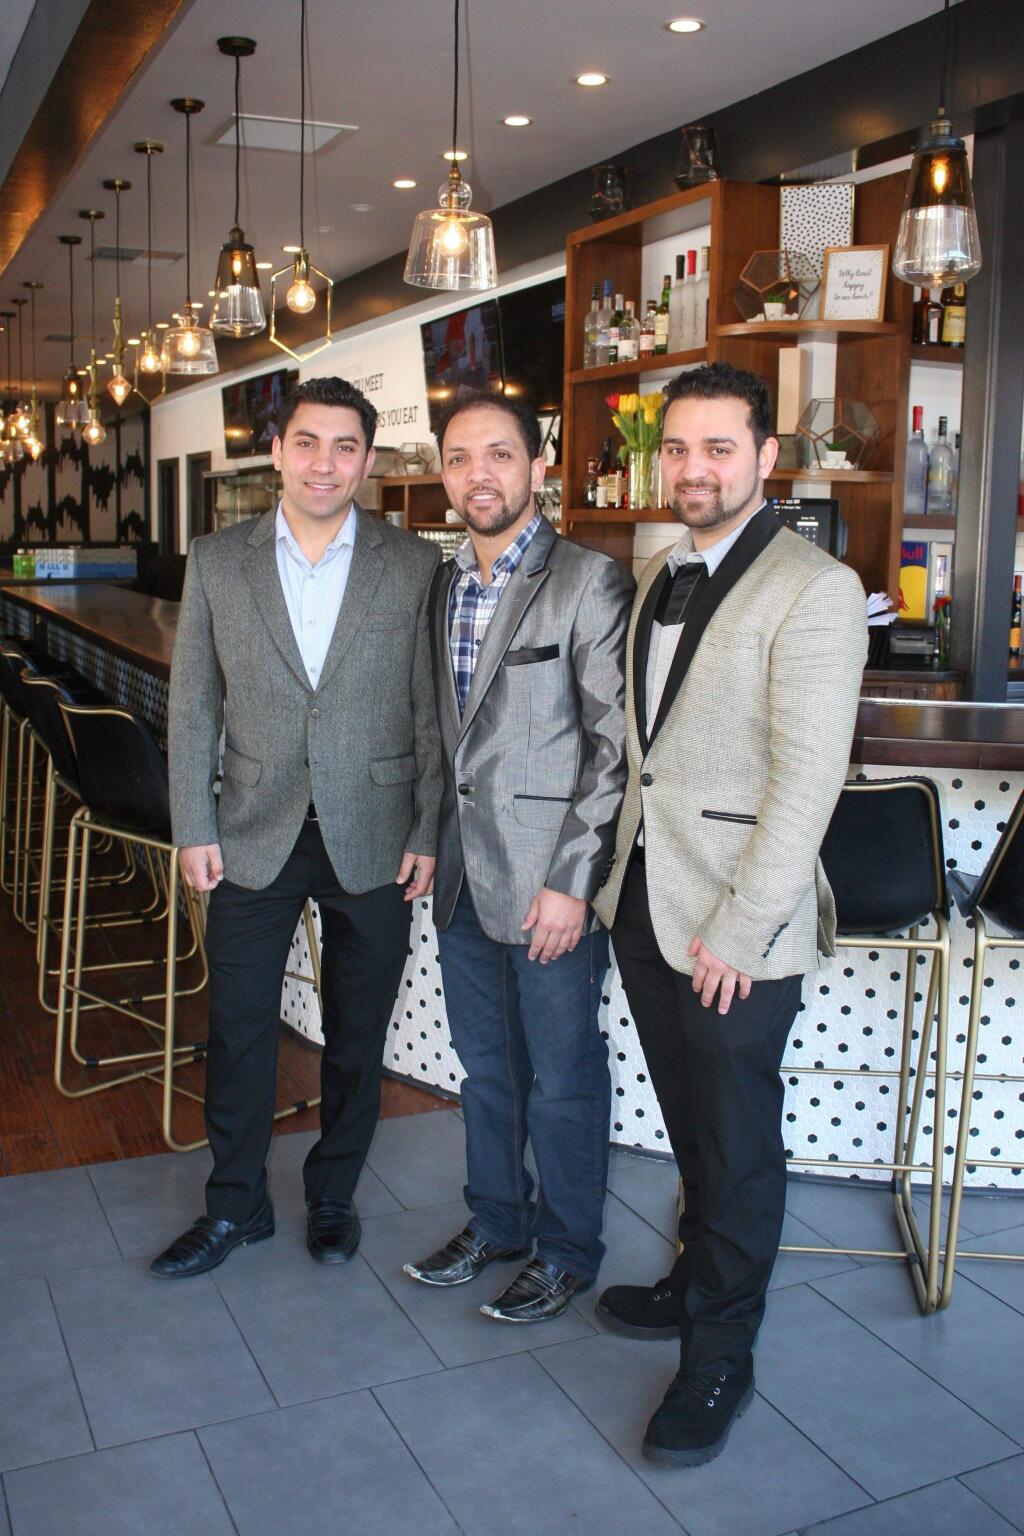 Chandi brothers Joti, Sonu and Sunny own Bibi's Burger Bar and two other restaurants in downtown Santa Rosa. (Cynthia Sweeney / The Business Journal)